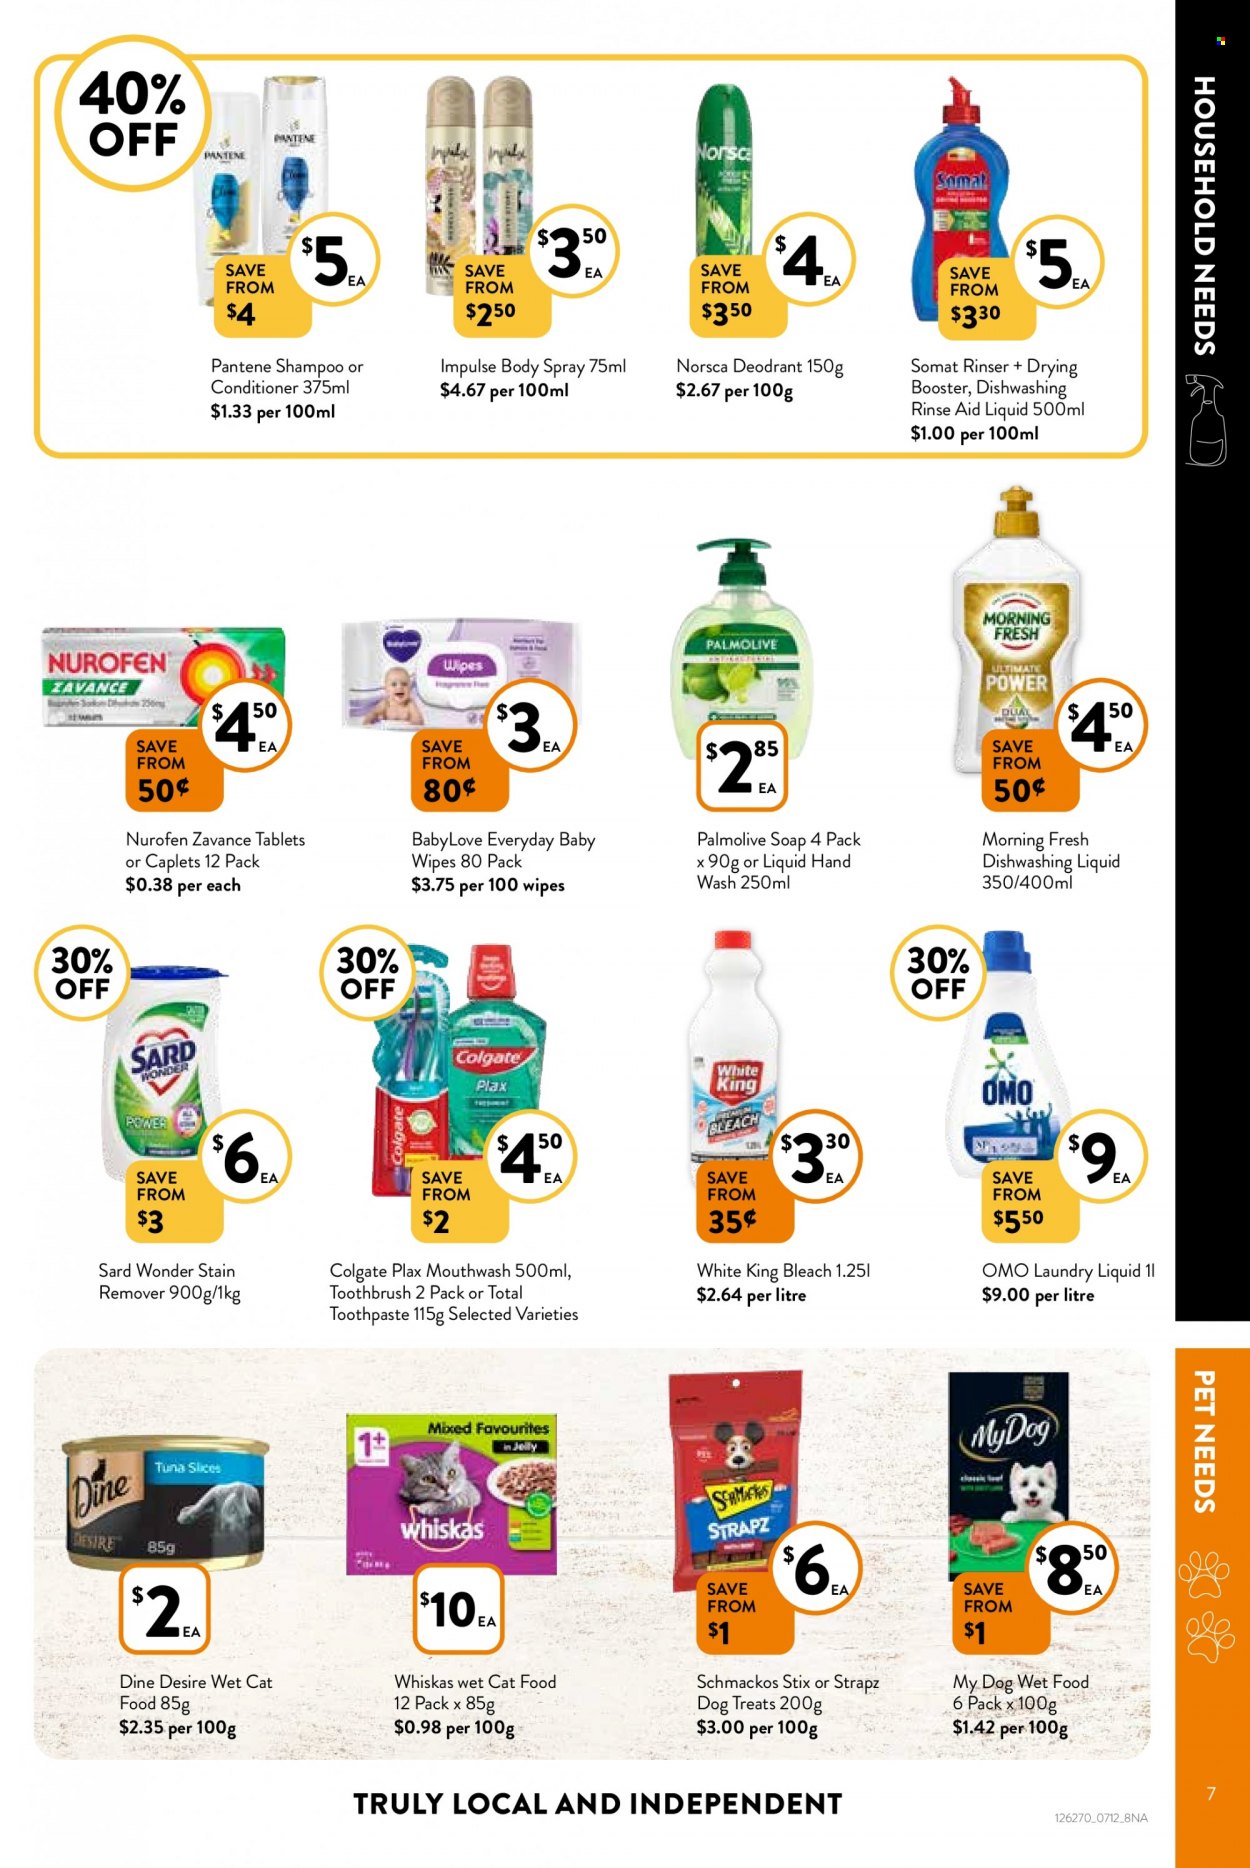 thumbnail - Foodworks Catalogue - 7 Dec 2022 - 13 Dec 2022 - Sales products - TRULY, wipes, baby wipes, BabyLove, bleach, stain remover, Omo, laundry detergent, dishwashing liquid, shampoo, hand wash, Palmolive, soap, Colgate, toothbrush, toothpaste, mouthwash, Plax, conditioner, Pantene, body spray, animal food, animal treats, cat food, wet dog food, Whiskas, Strapz, Schmackos, wet cat food, Nurofen. Page 7.